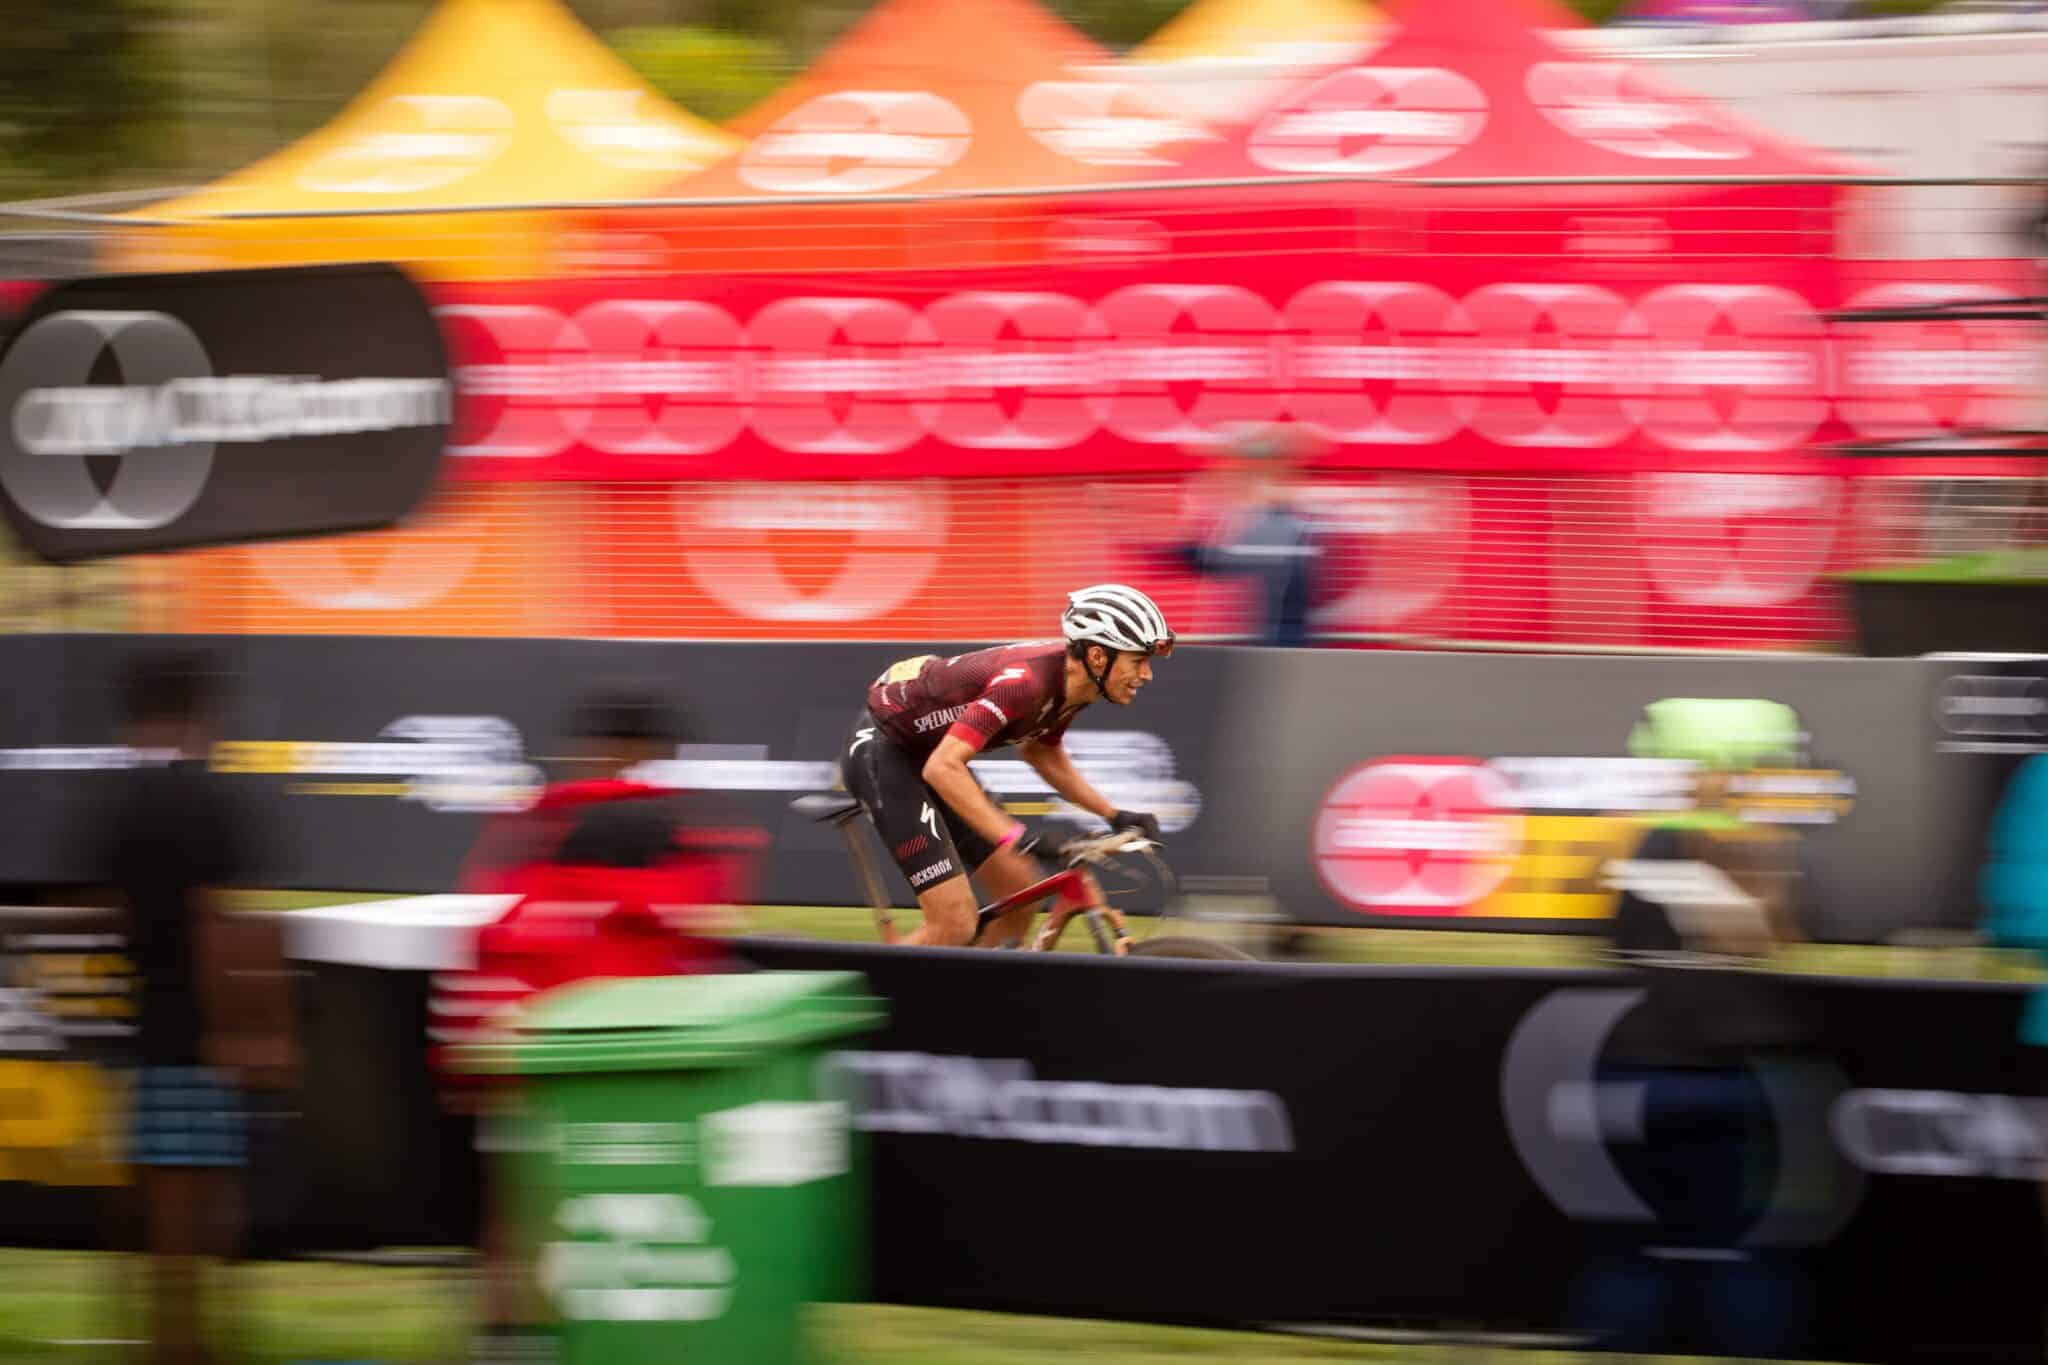 Cape Epic Stage 4: Toyota-NinetyOne-Specialized On The Top Step